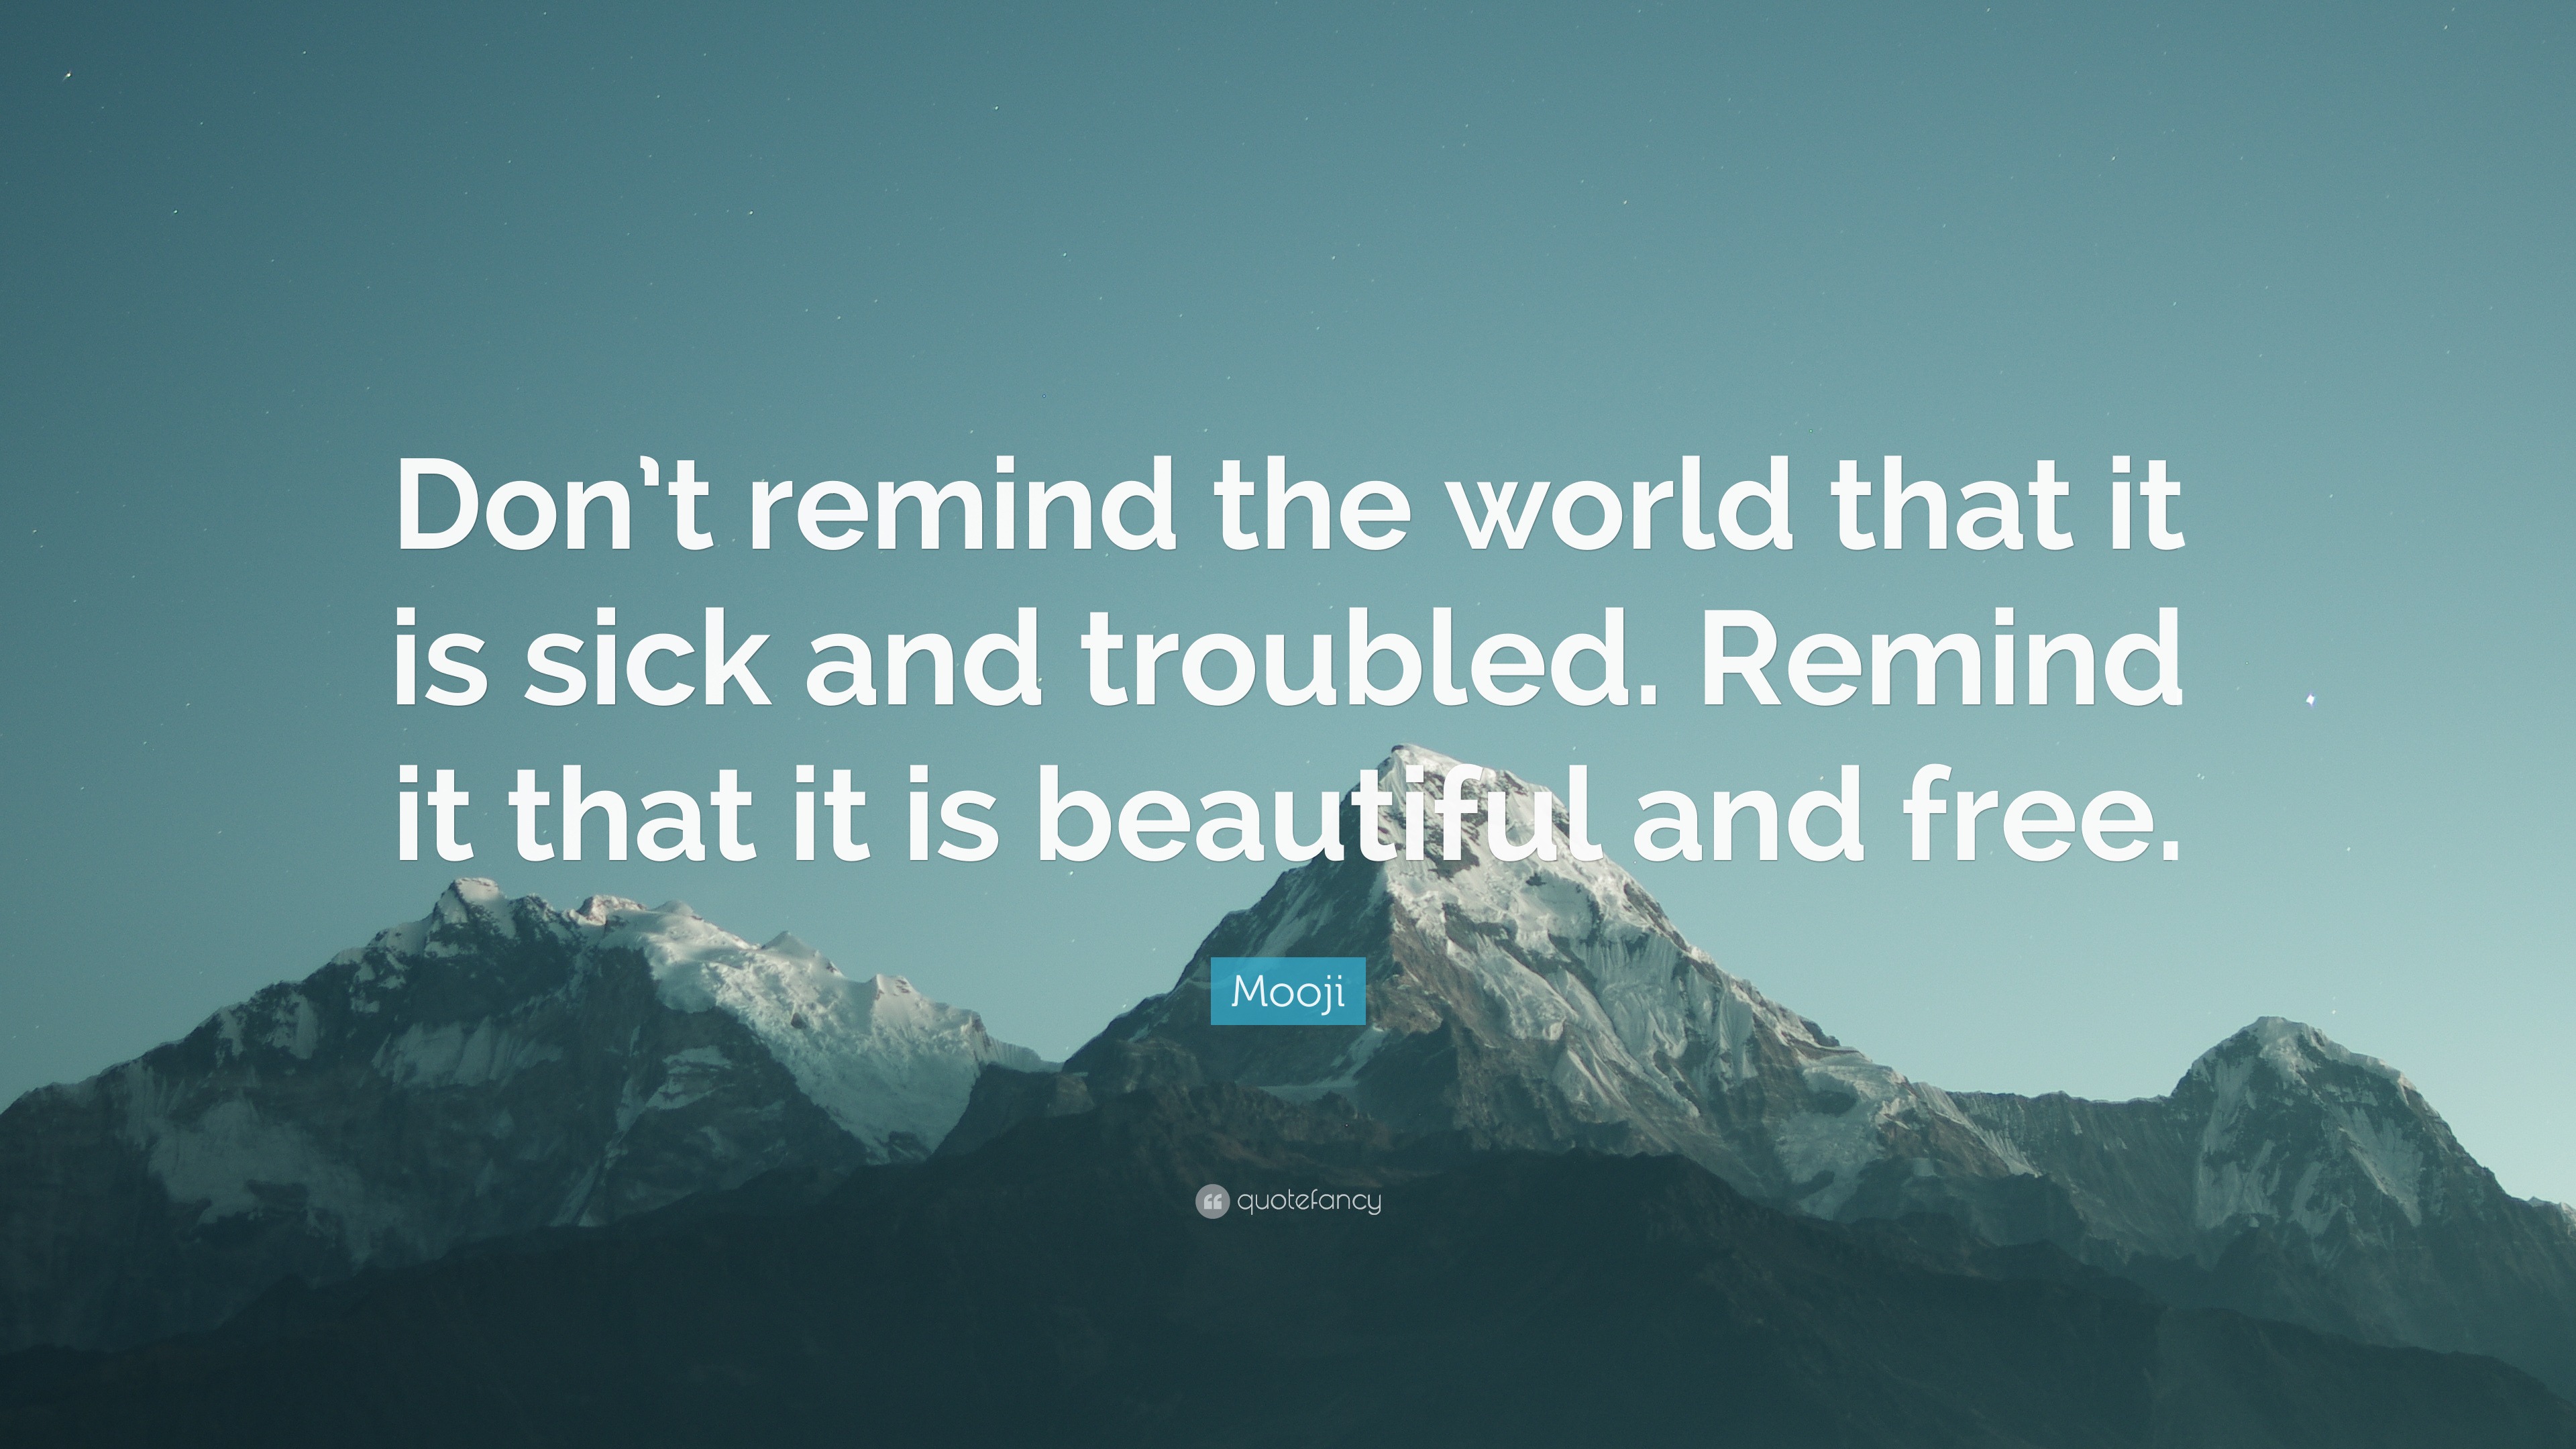 Mooji Quote: “Don’t remind the world that it is sick and troubled